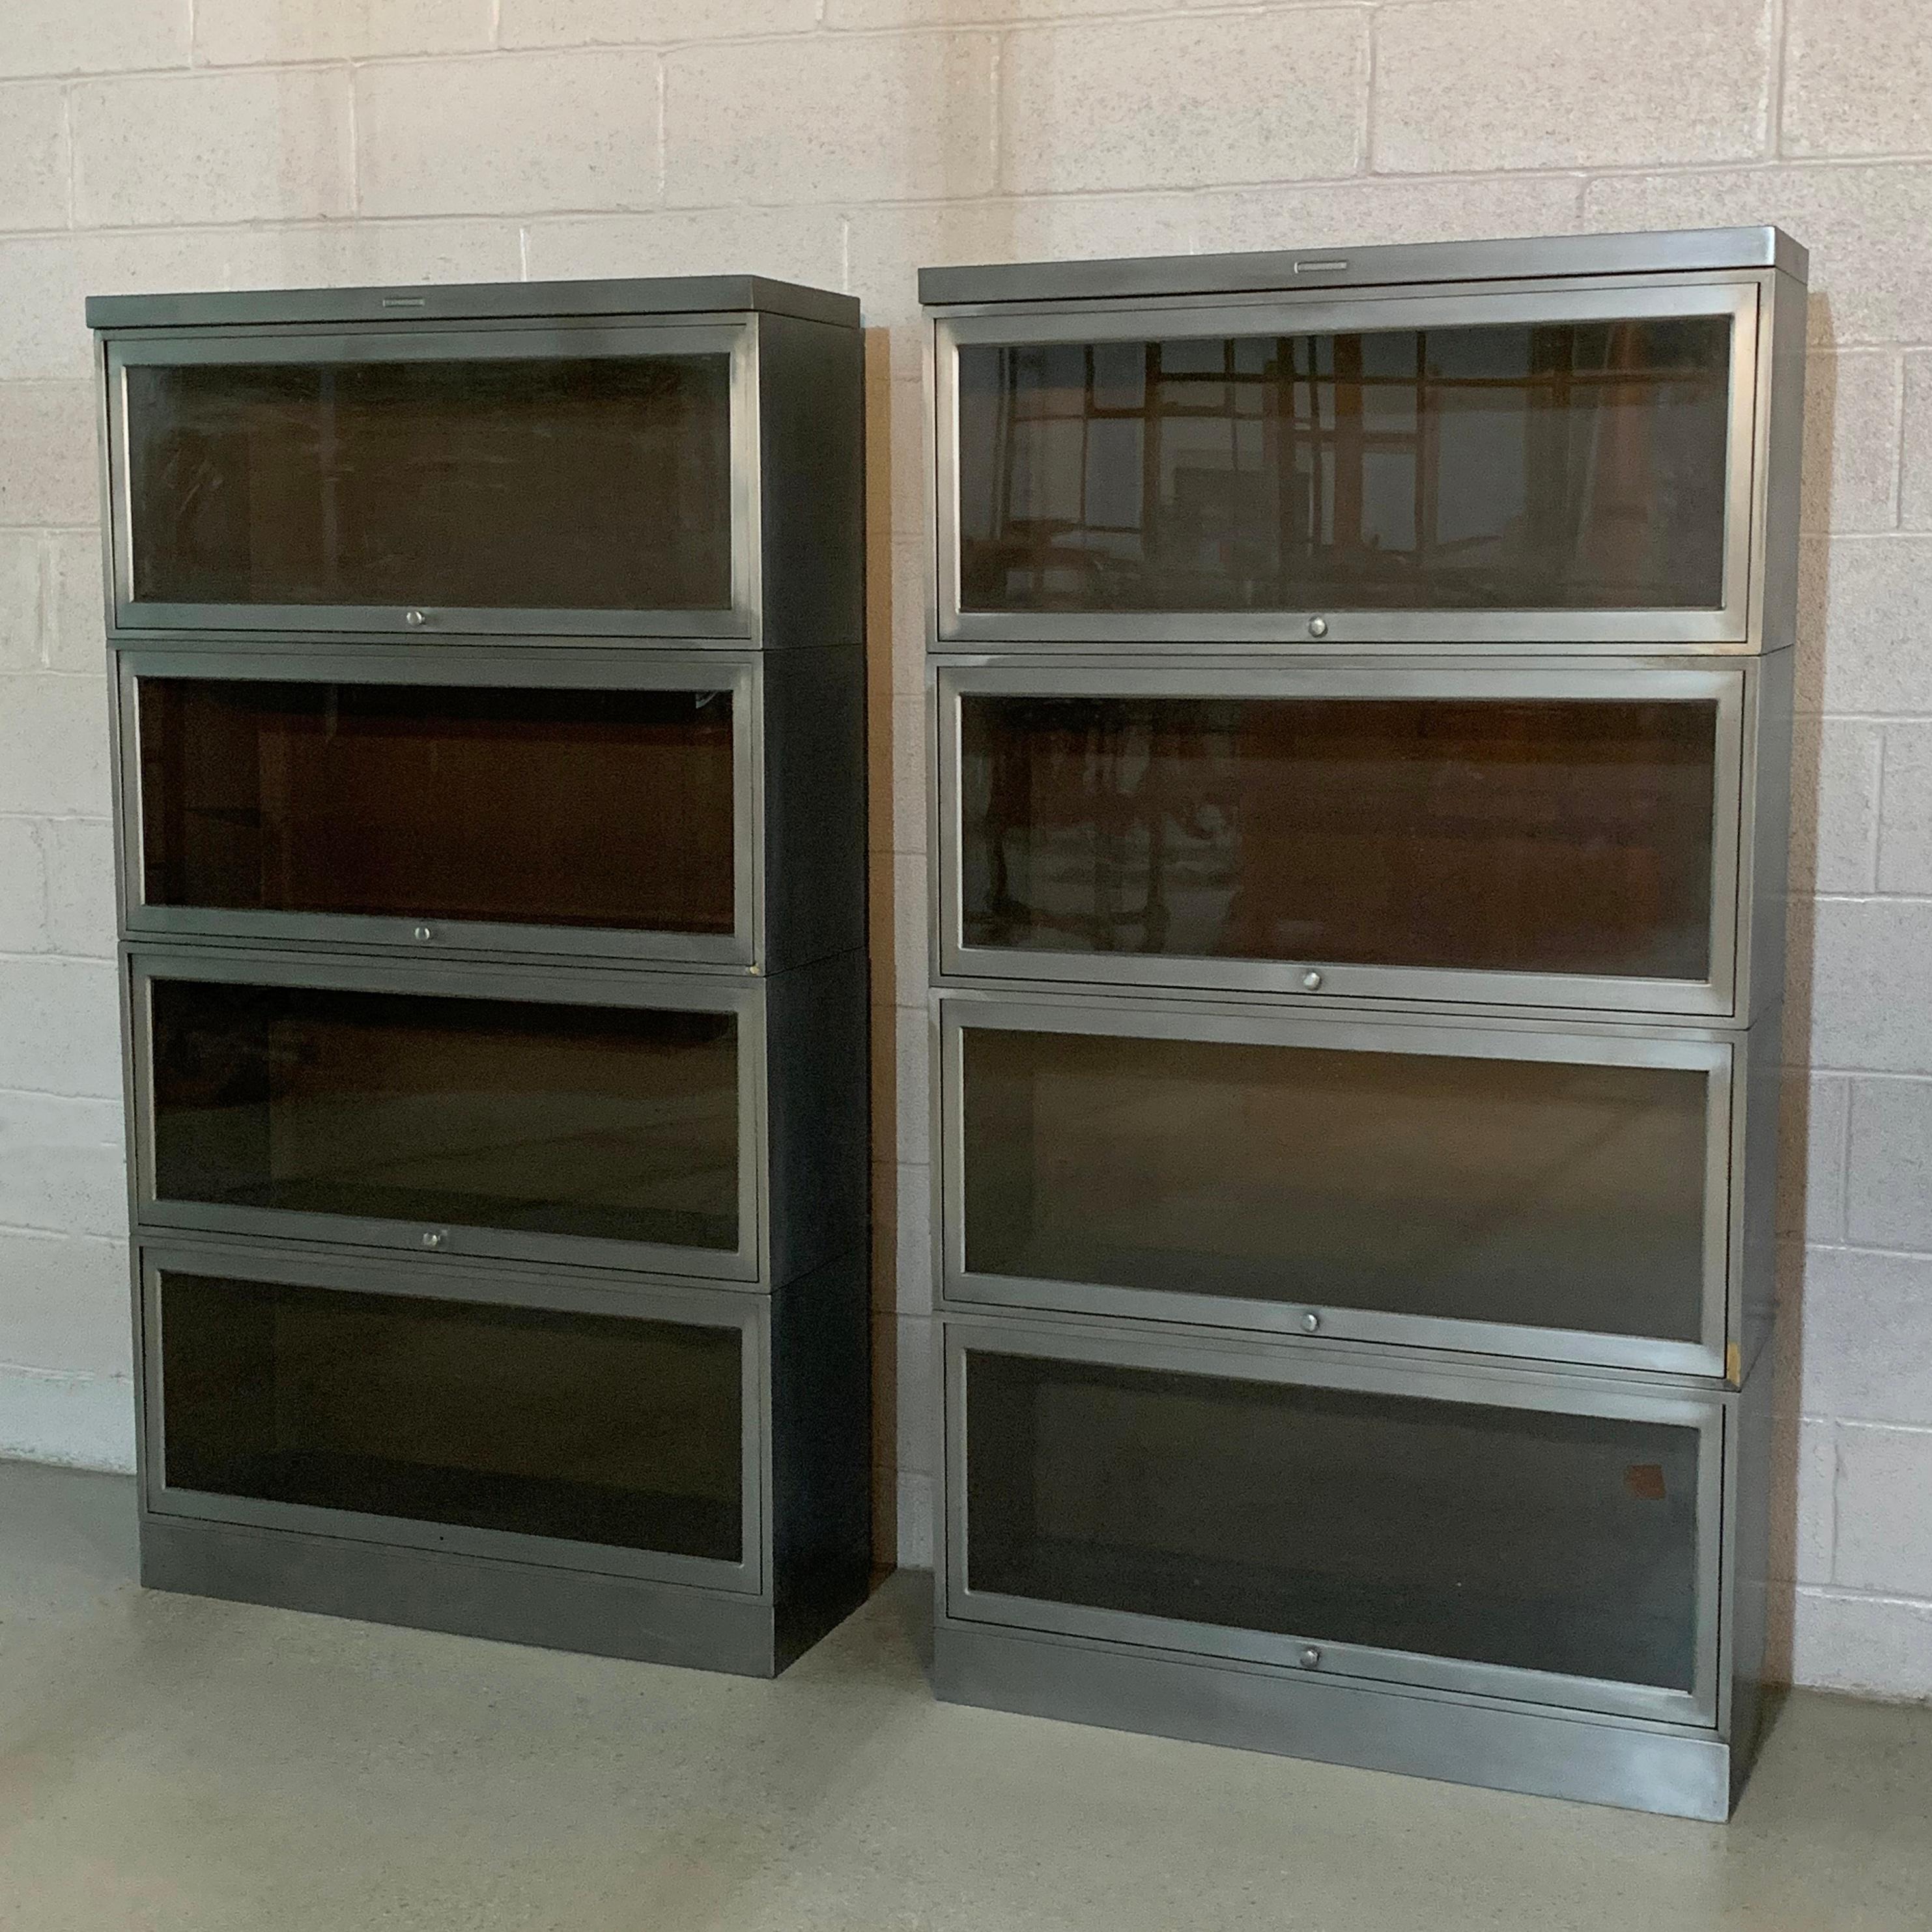 Pair of industrial, midcentury, barrister bookcase cabinets by Steelcase feature 4 stackable, interlocking cases with sliding, glass front doors. The case interiors measure 12.5 inch height x 10.25 inch deep each.